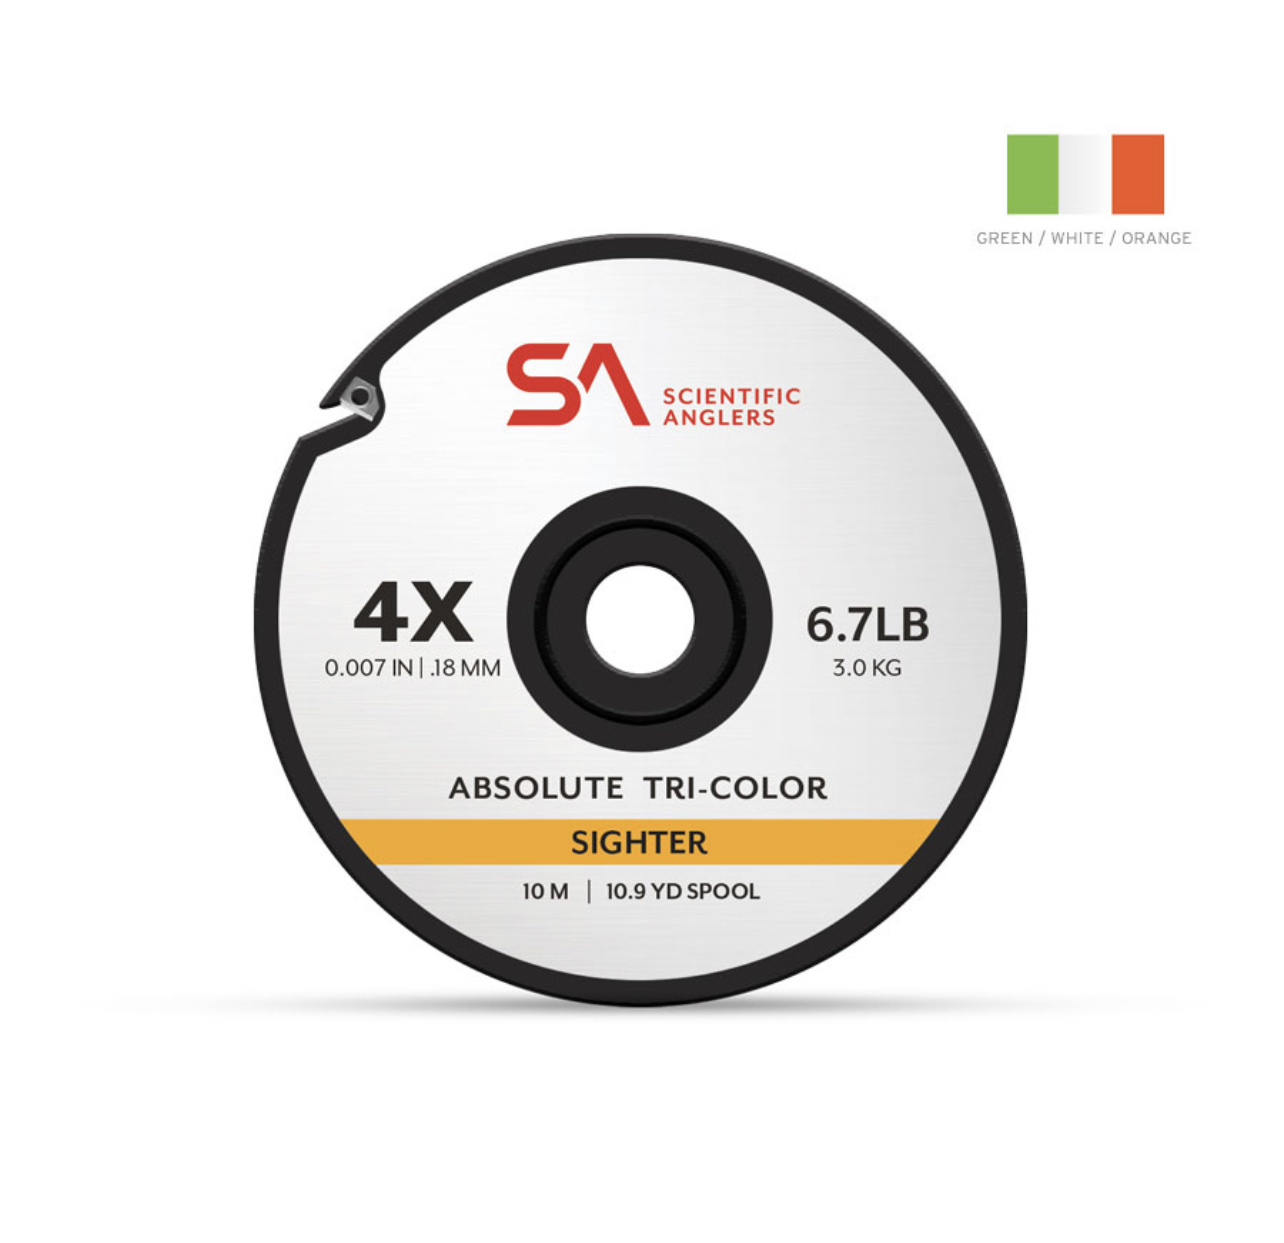 Scientific Anglers Absolute Tri-Color Sighter Tippet